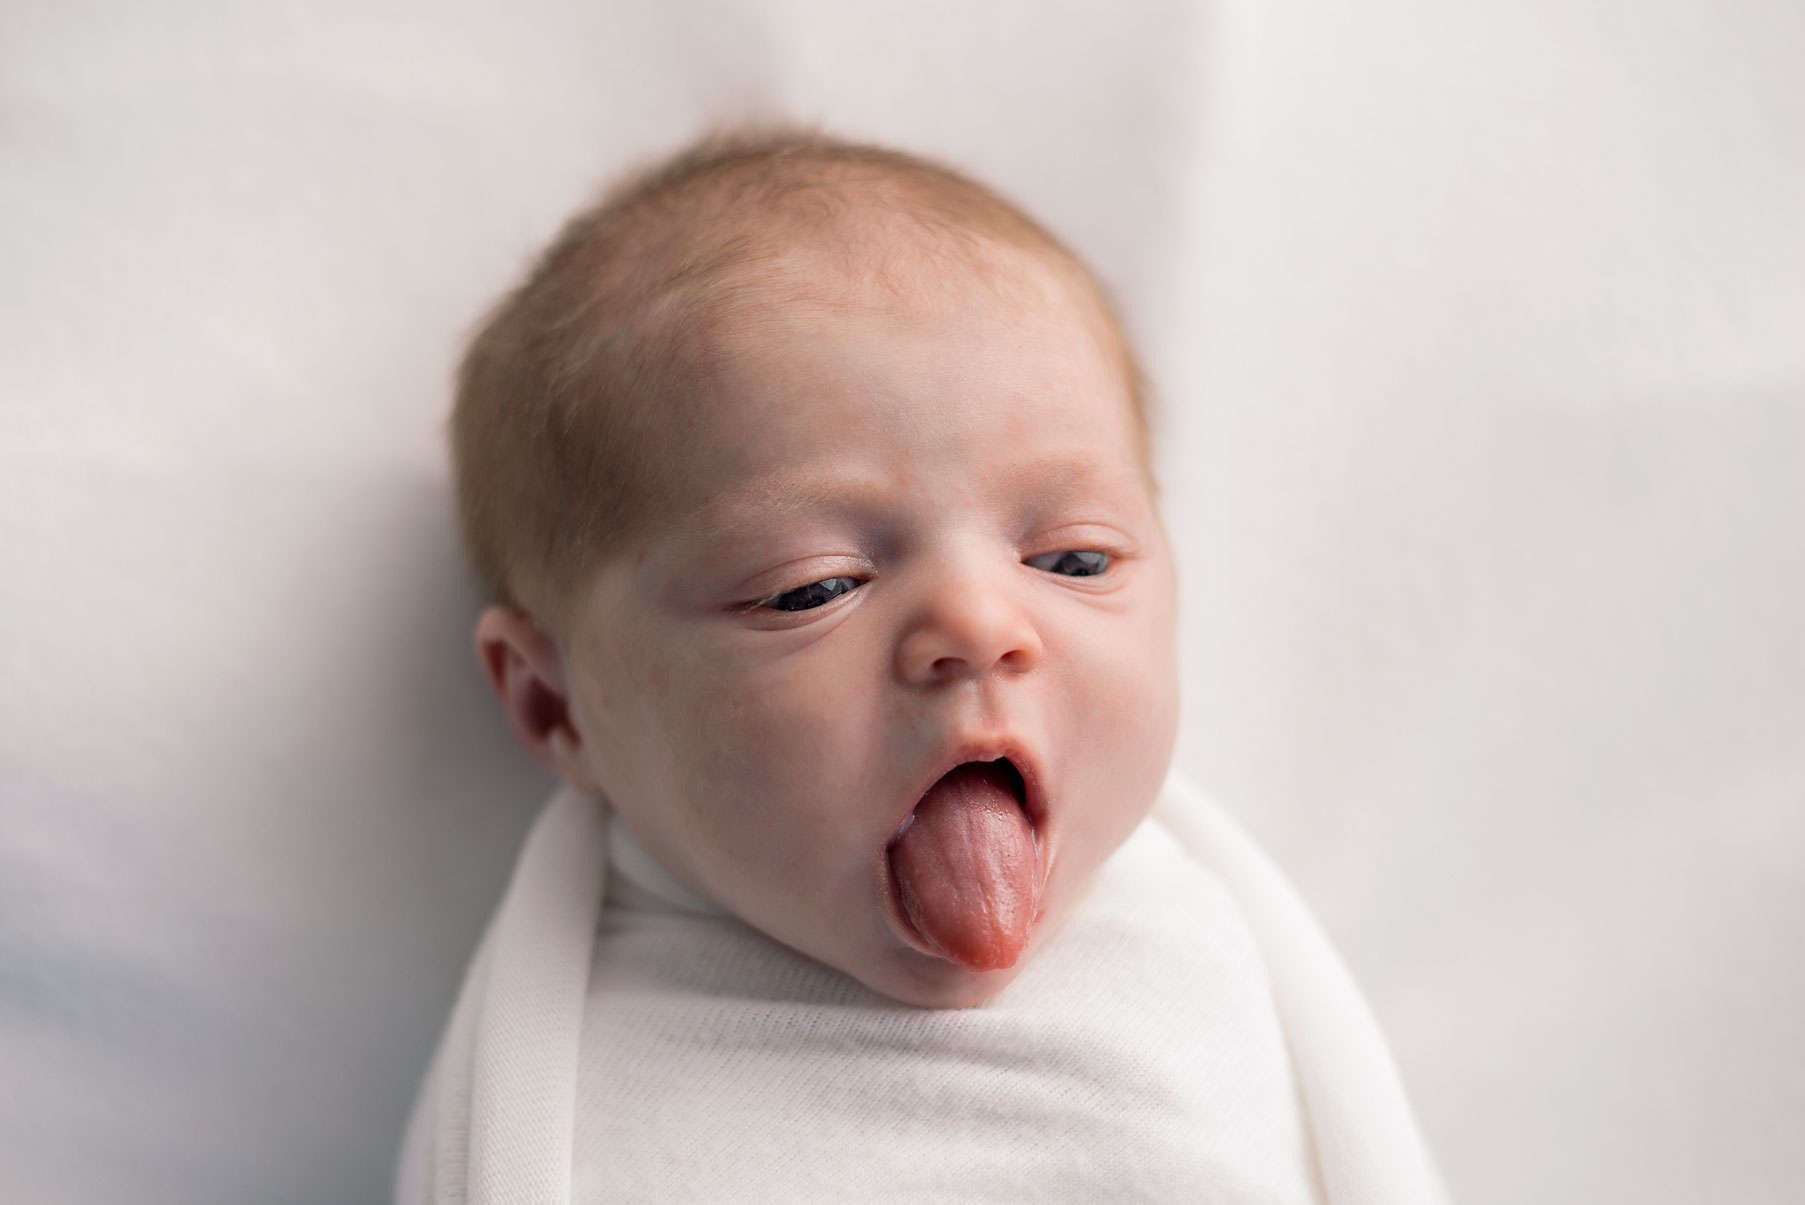 Newborn baby sticking out tongue